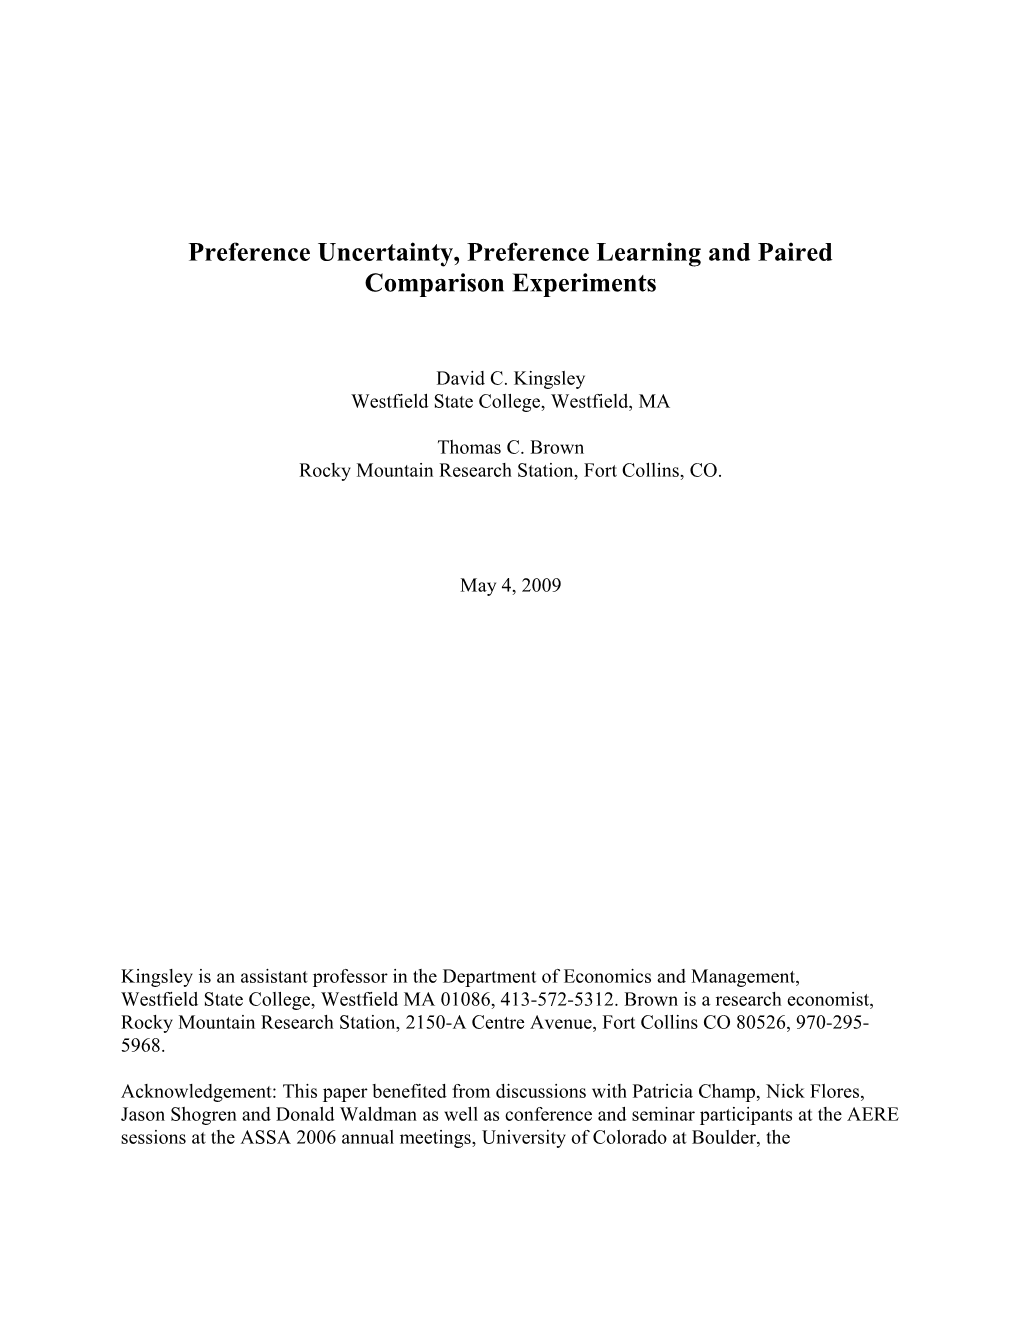 Preference Uncertainty, Preference Learning and Paired Comparison Experiments